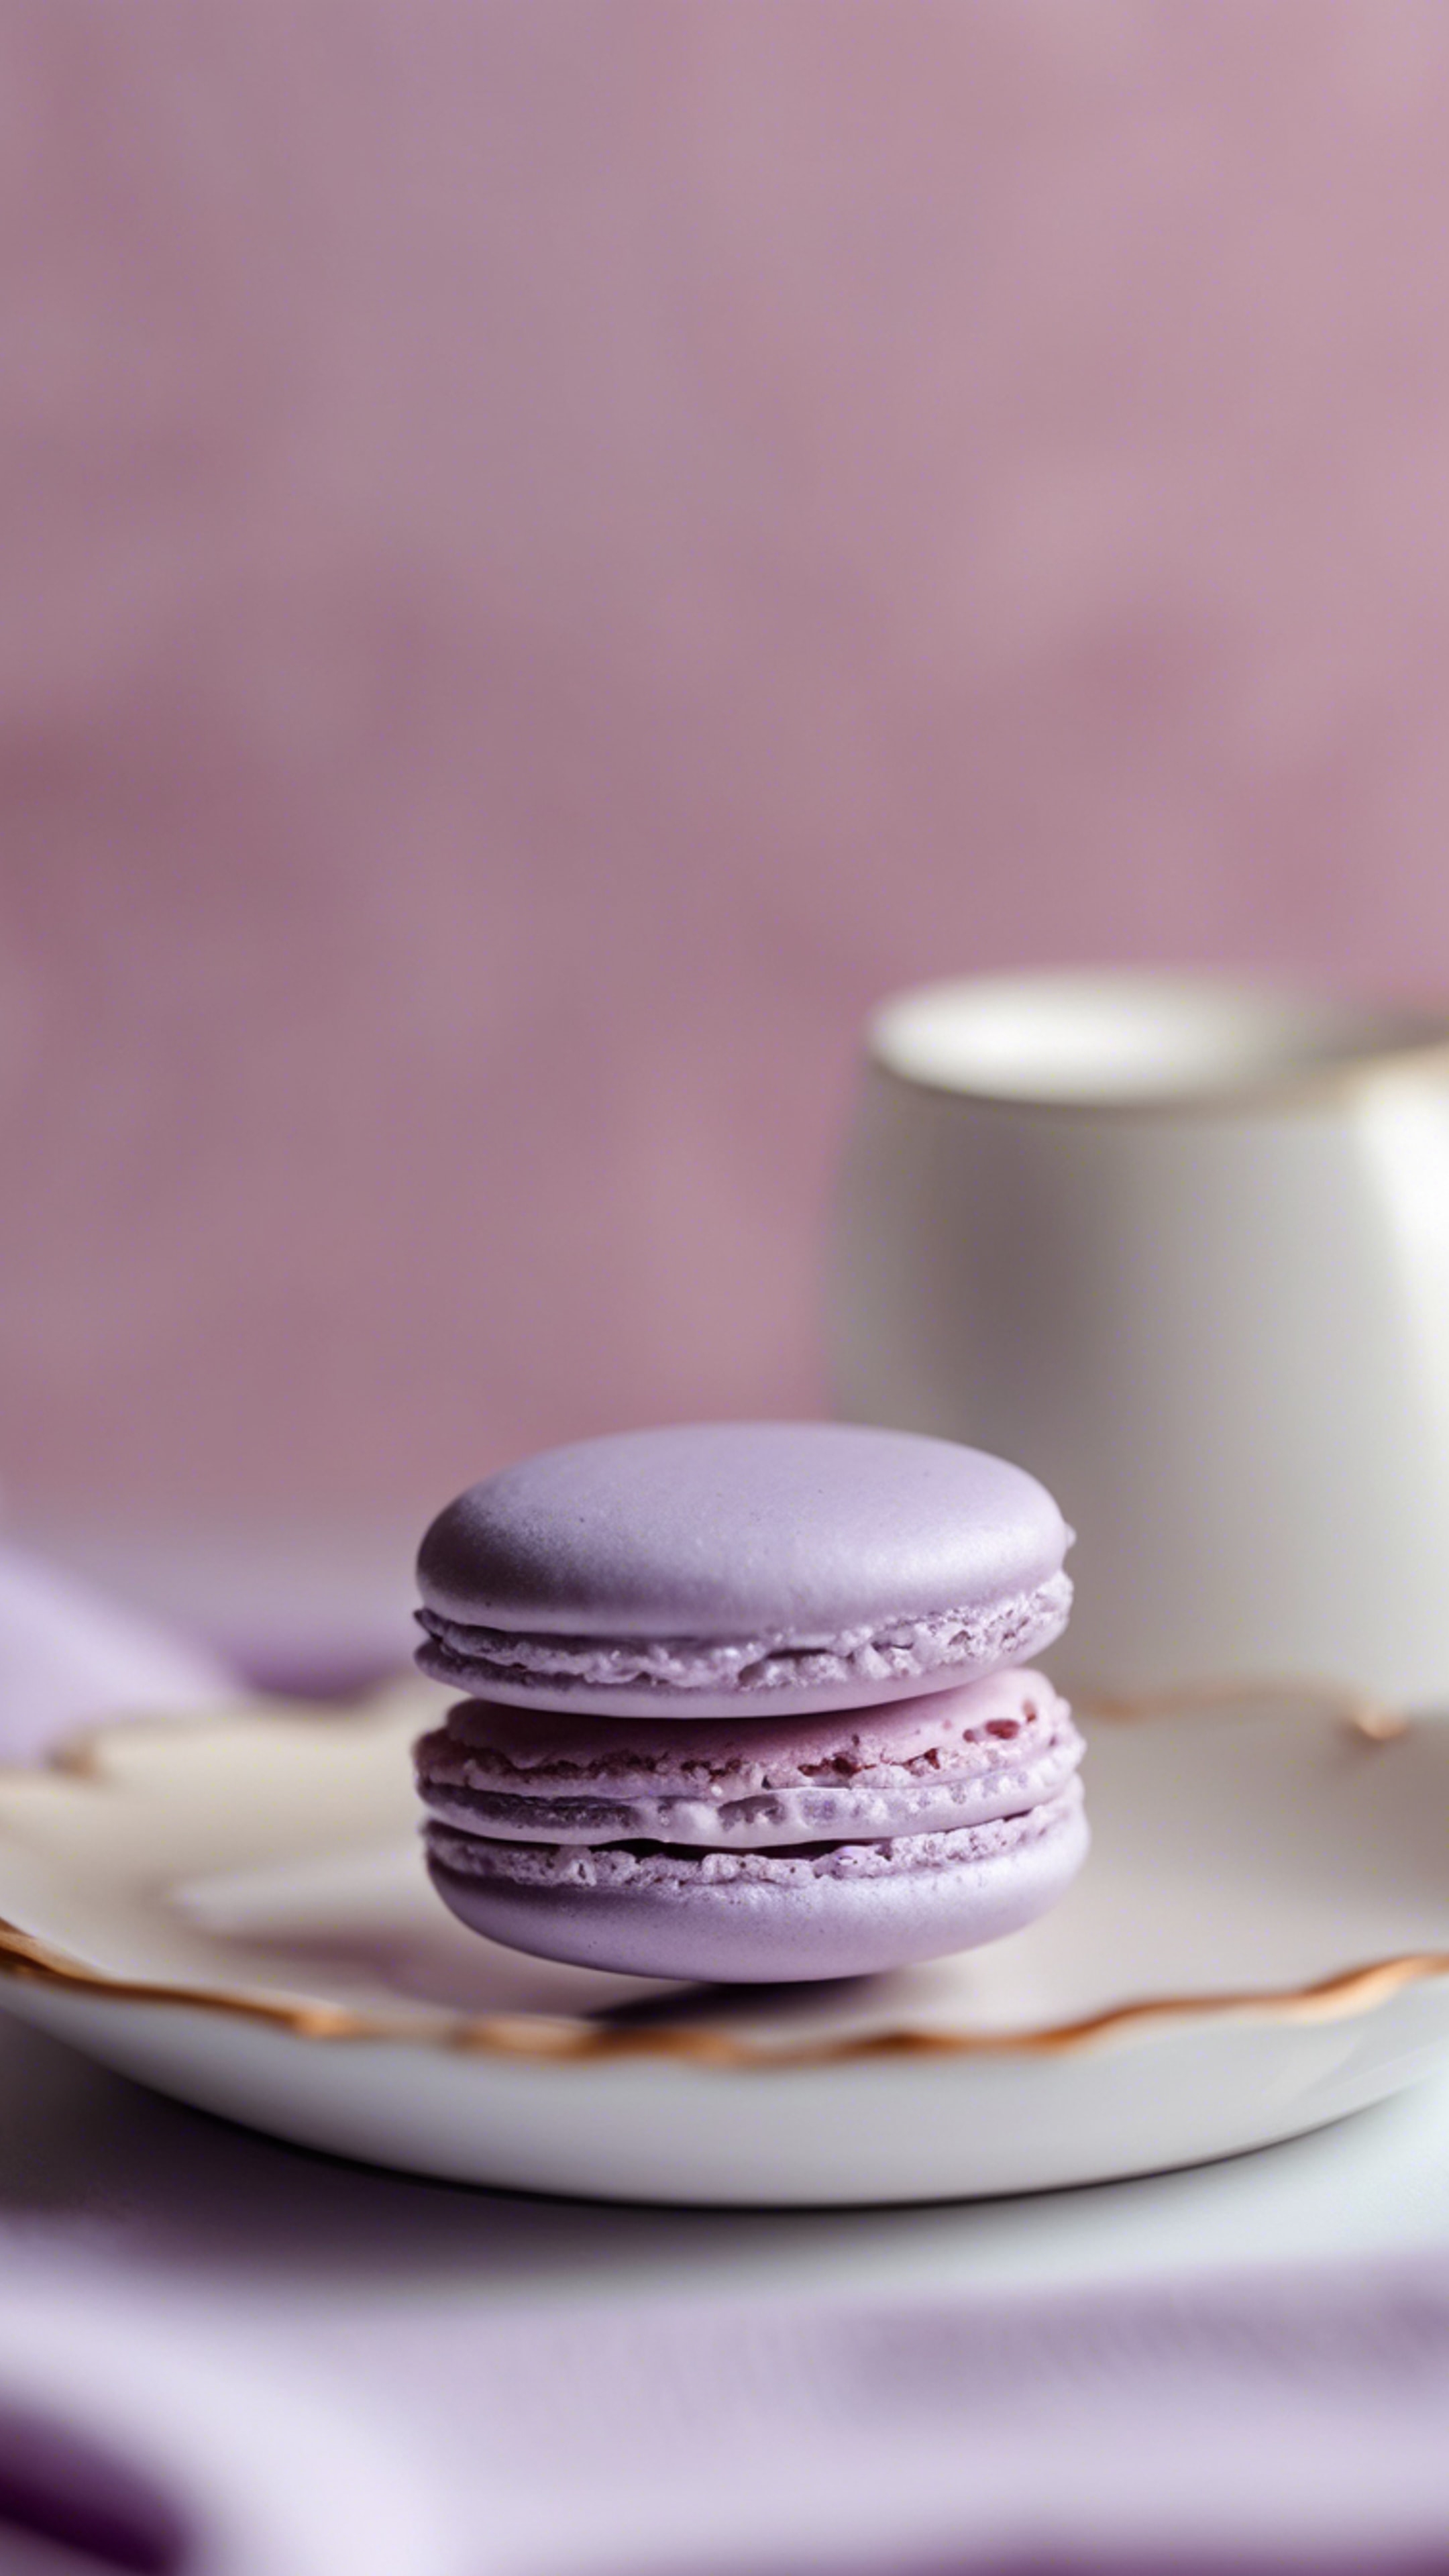 A close-up of a pastel purple-hued french macaron on a white porcelain plate. Tapet[867427dfb4584ec3b53c]